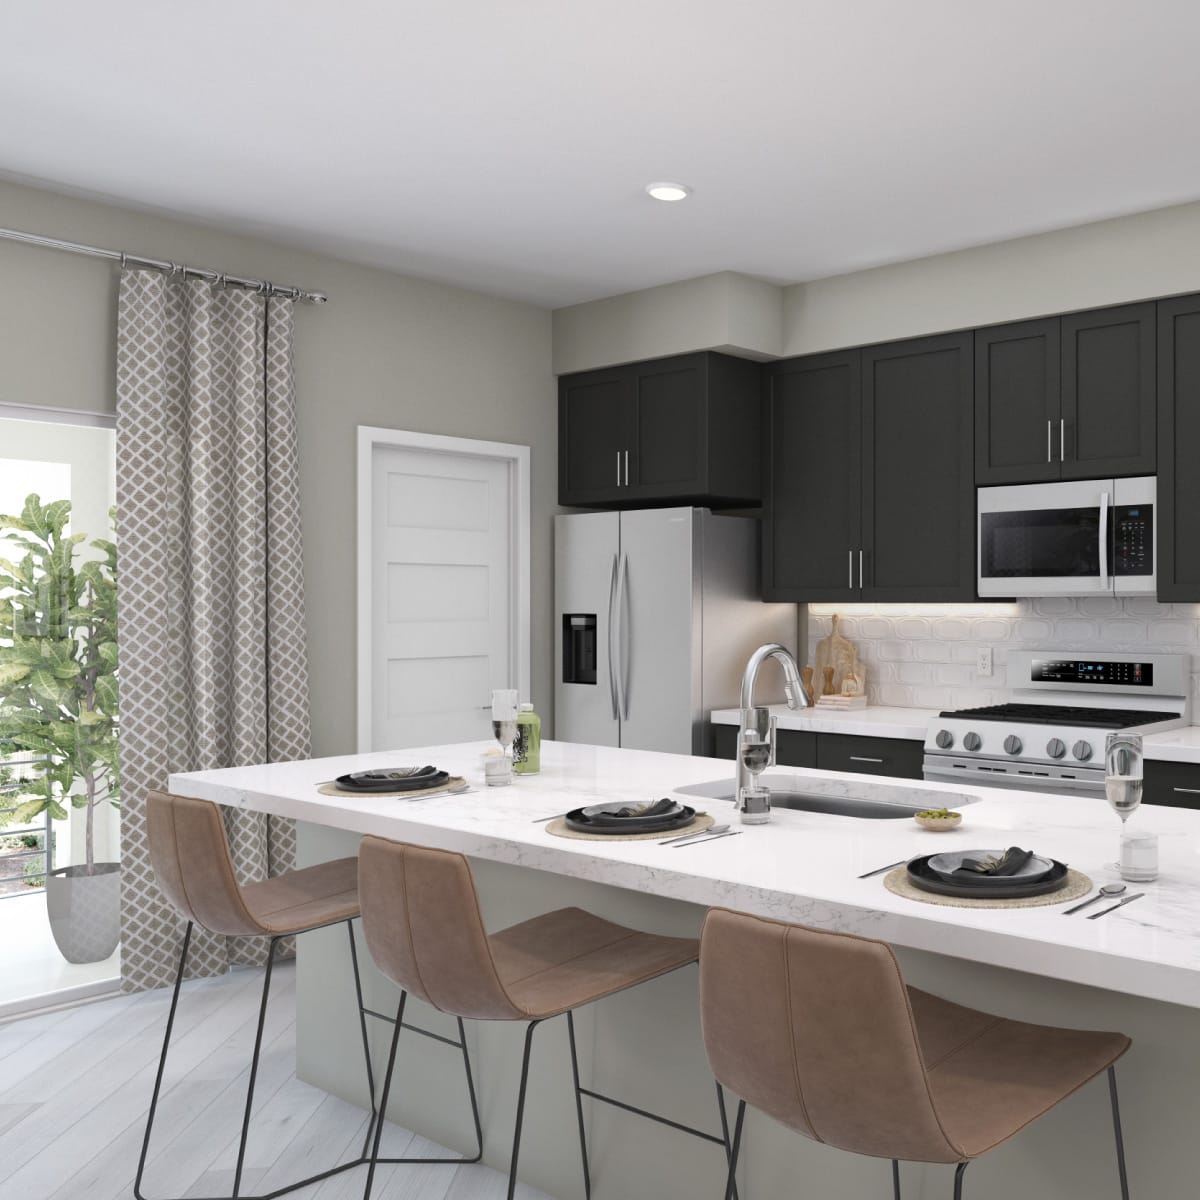 Kitchen in Plan 5 at Belmont by Melia Homes in Cypress, CA